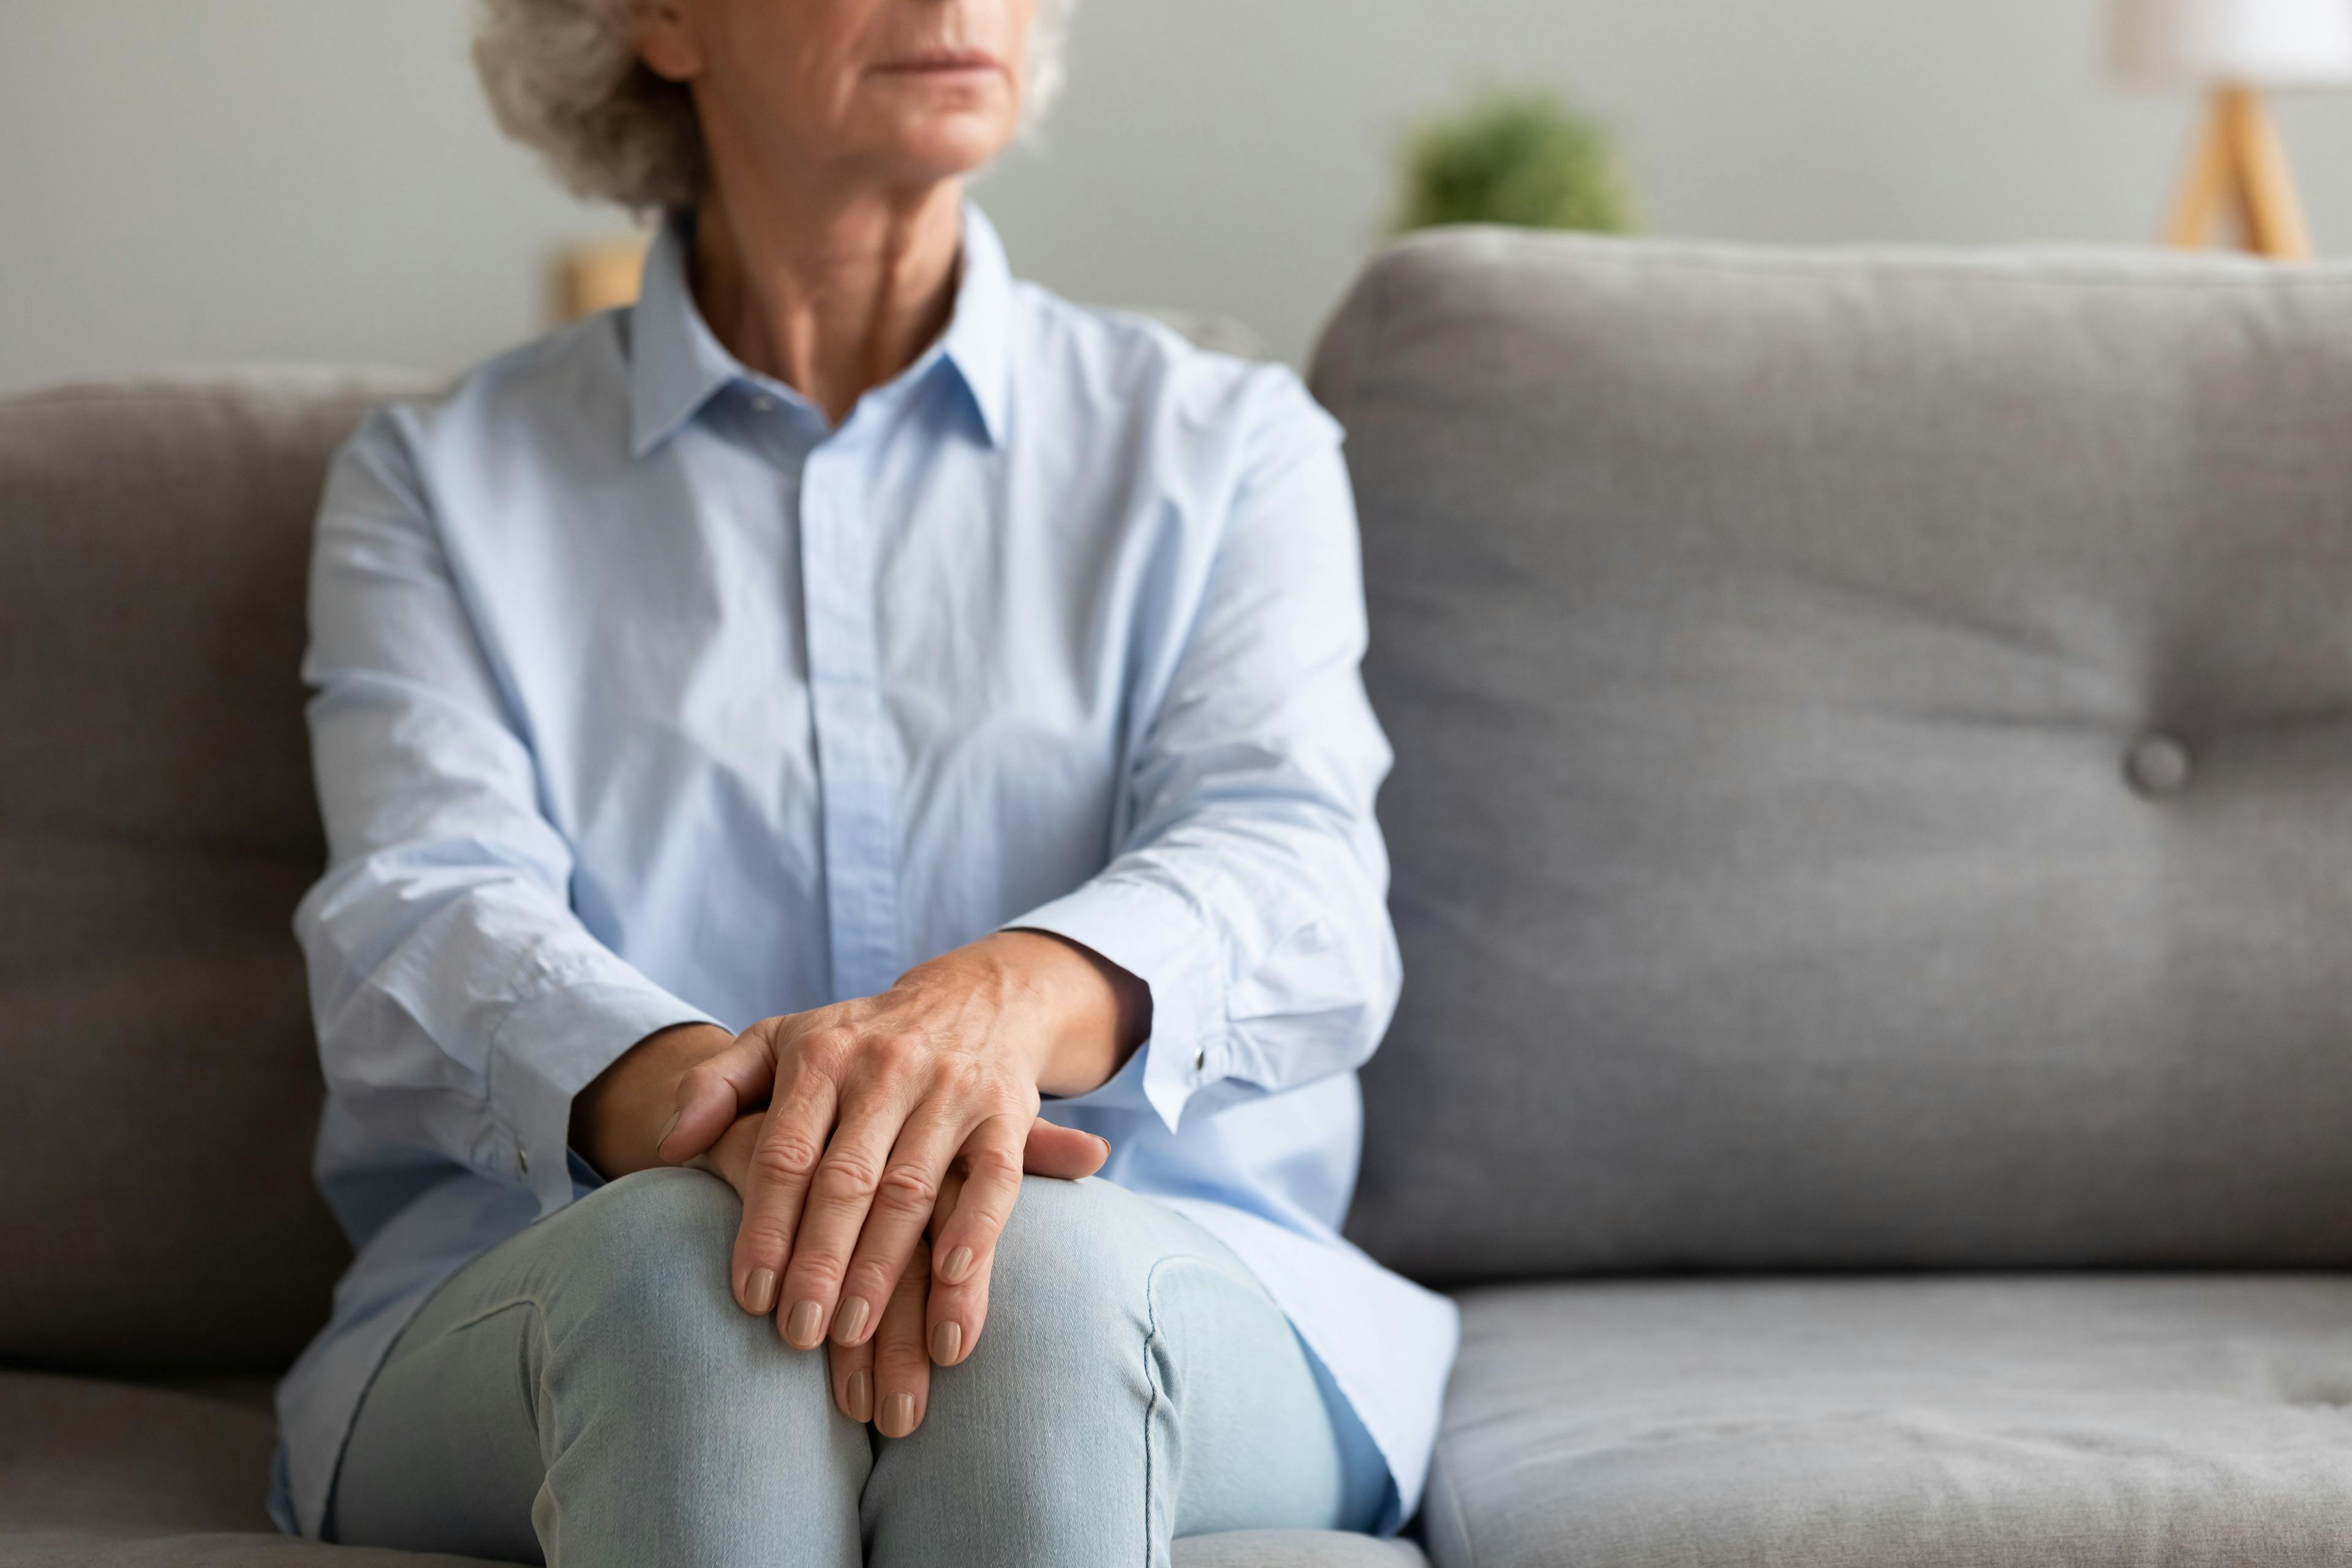 Loneliness, Social Isolation Tied to Increased Risk of Cardiovascular Disease in Postmenopausal Women